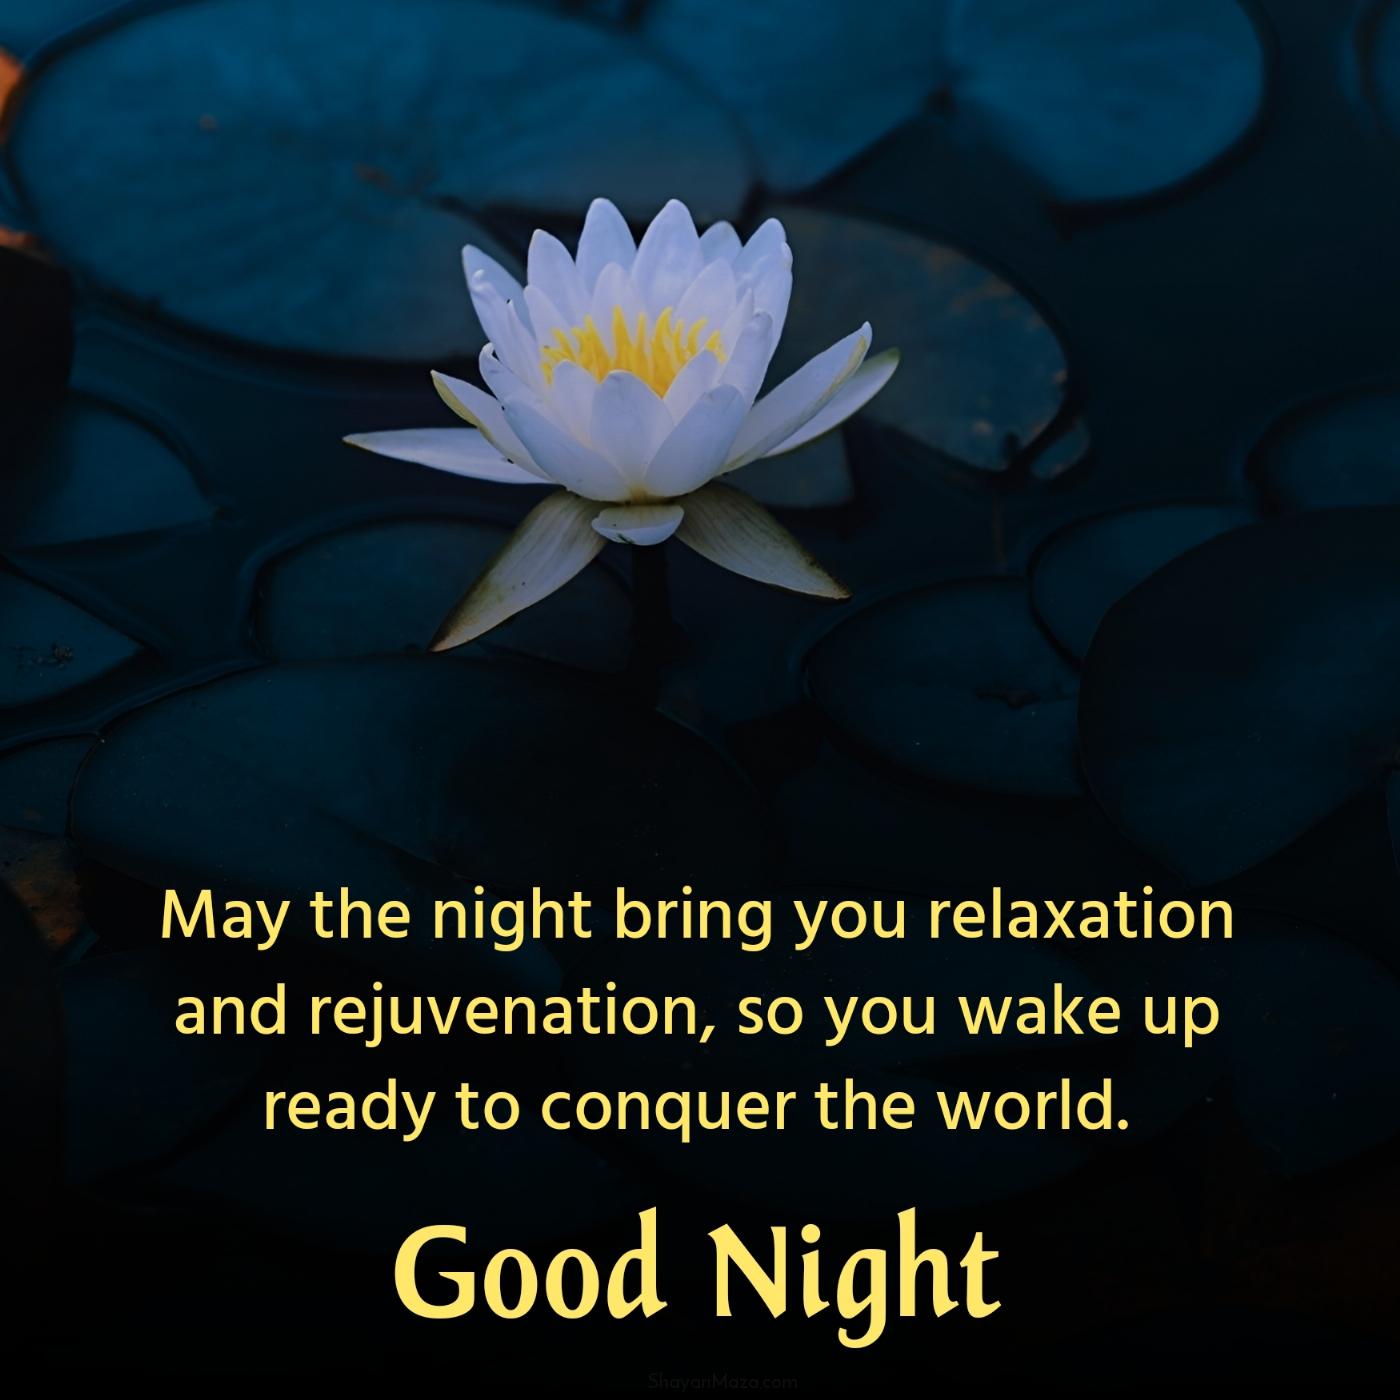 May the night bring you relaxation and rejuvenation